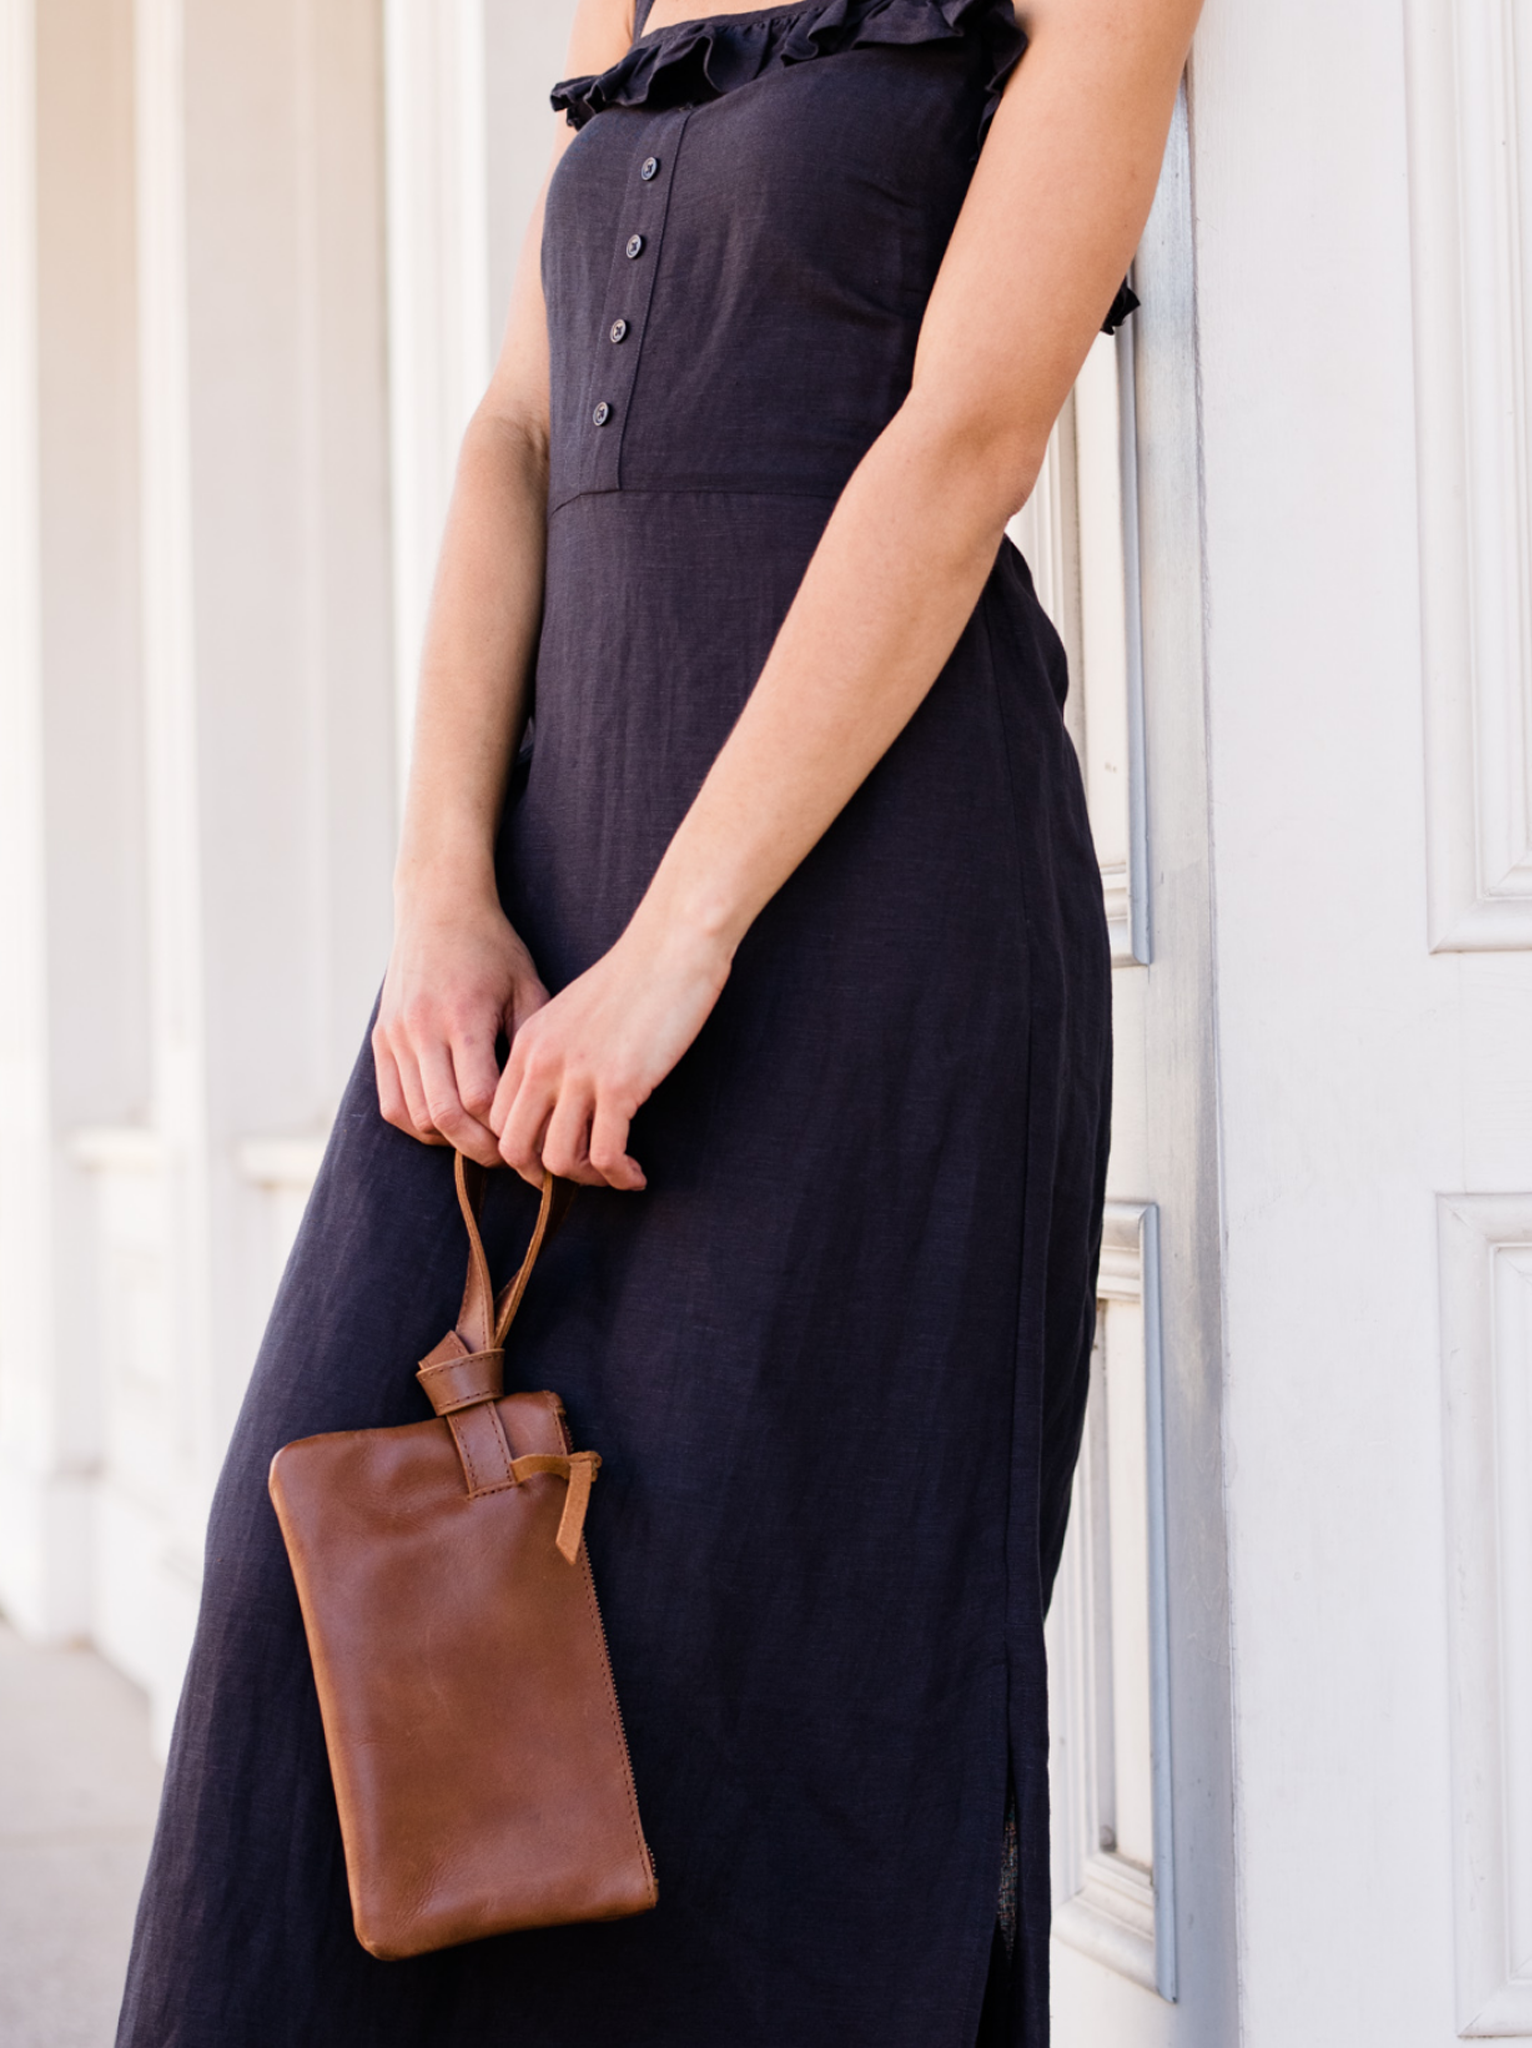 Woman in a navy dress holding a brown leather clutch.